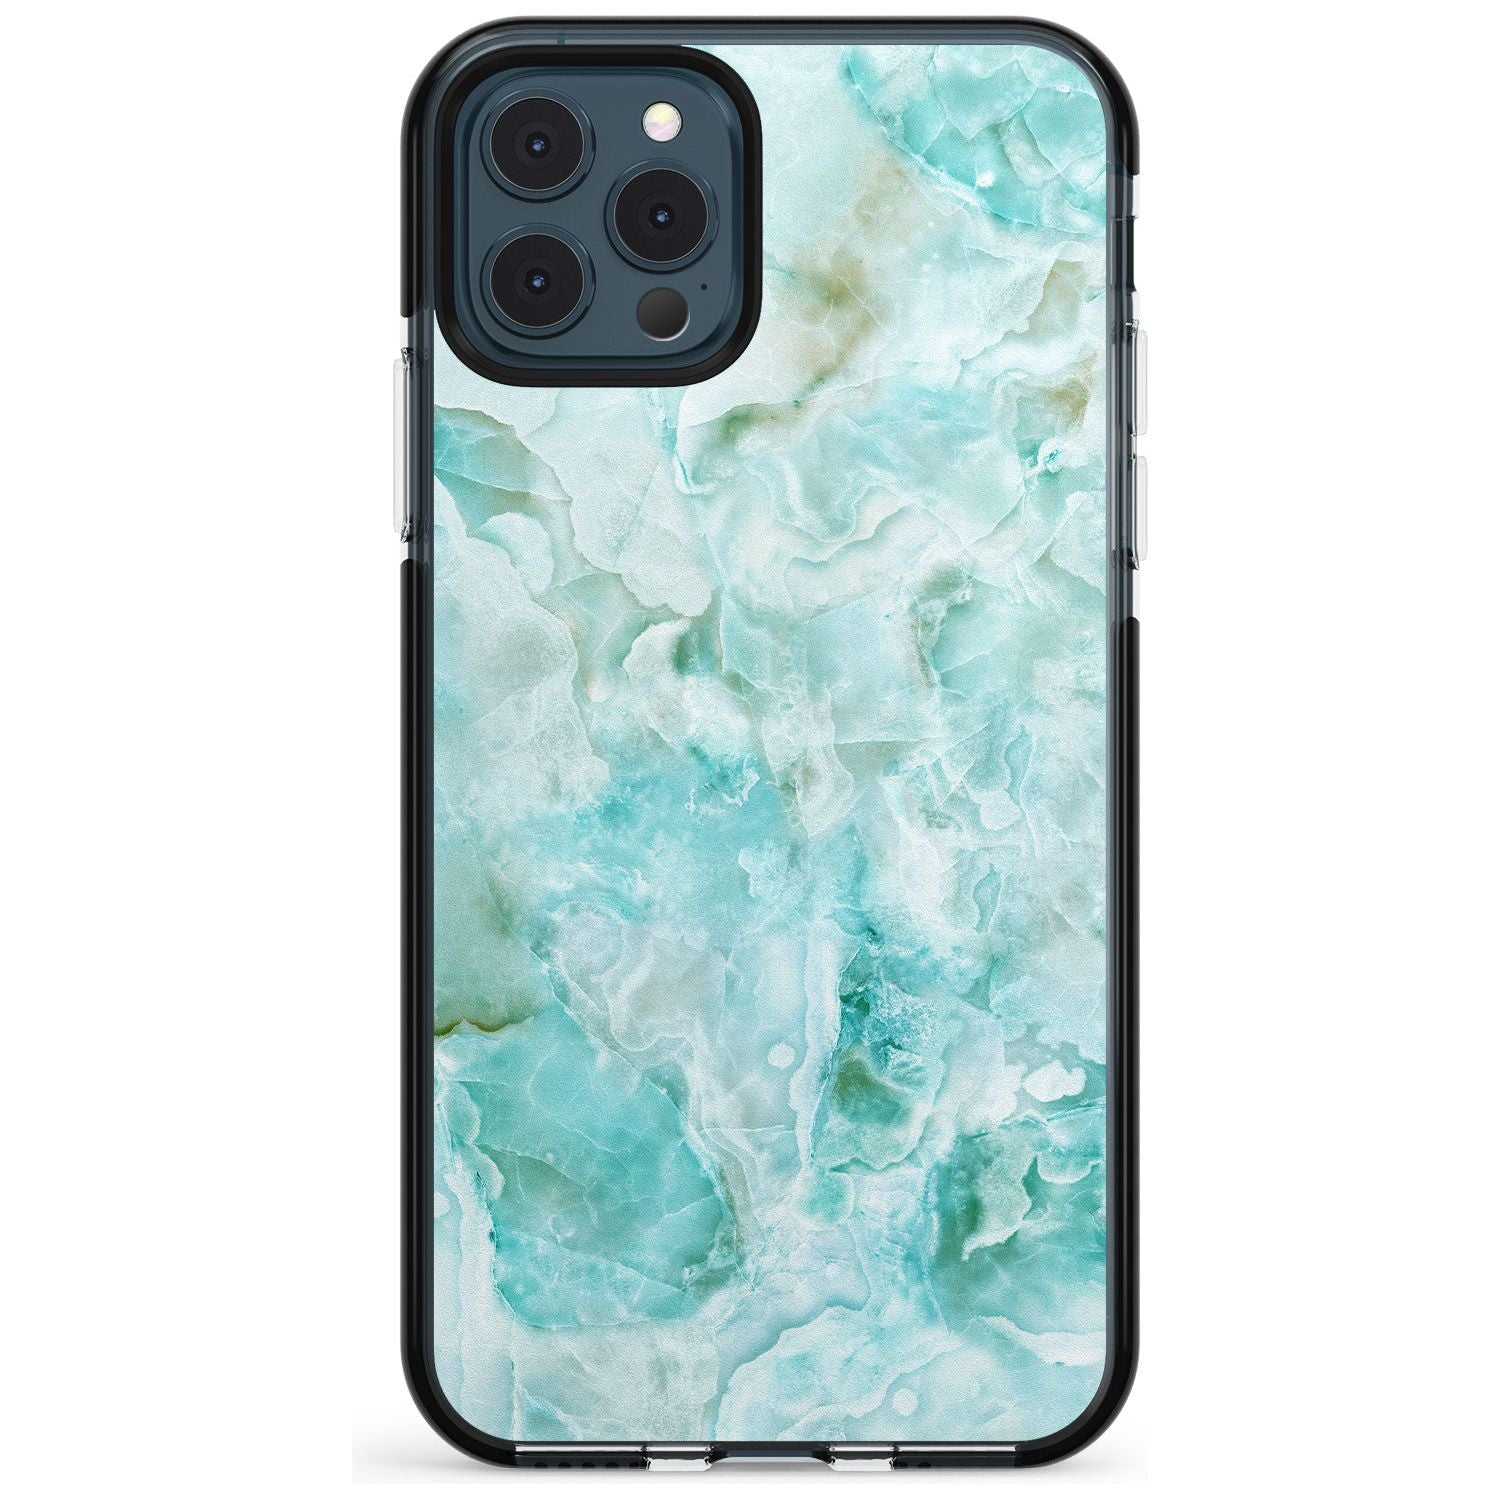 Turquoise Aqua Onyx Marble Pink Fade Impact Phone Case for iPhone 11